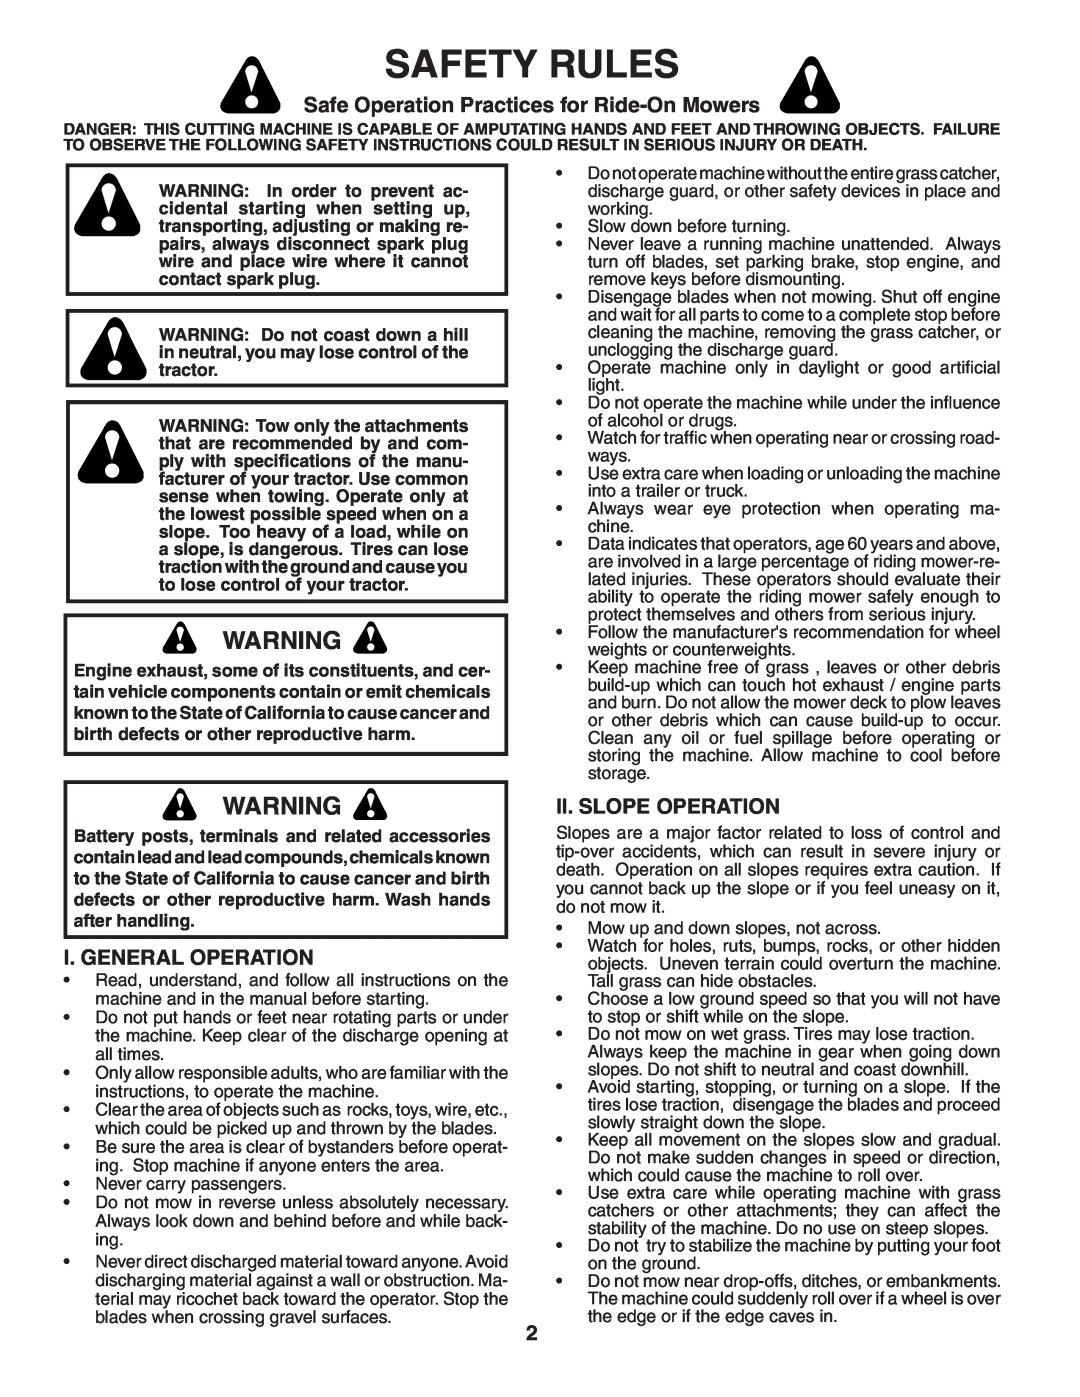 Poulan 404489 manual Safety Rules, Safe Operation Practices for Ride-On Mowers, I. General Operation, Ii. Slope Operation 